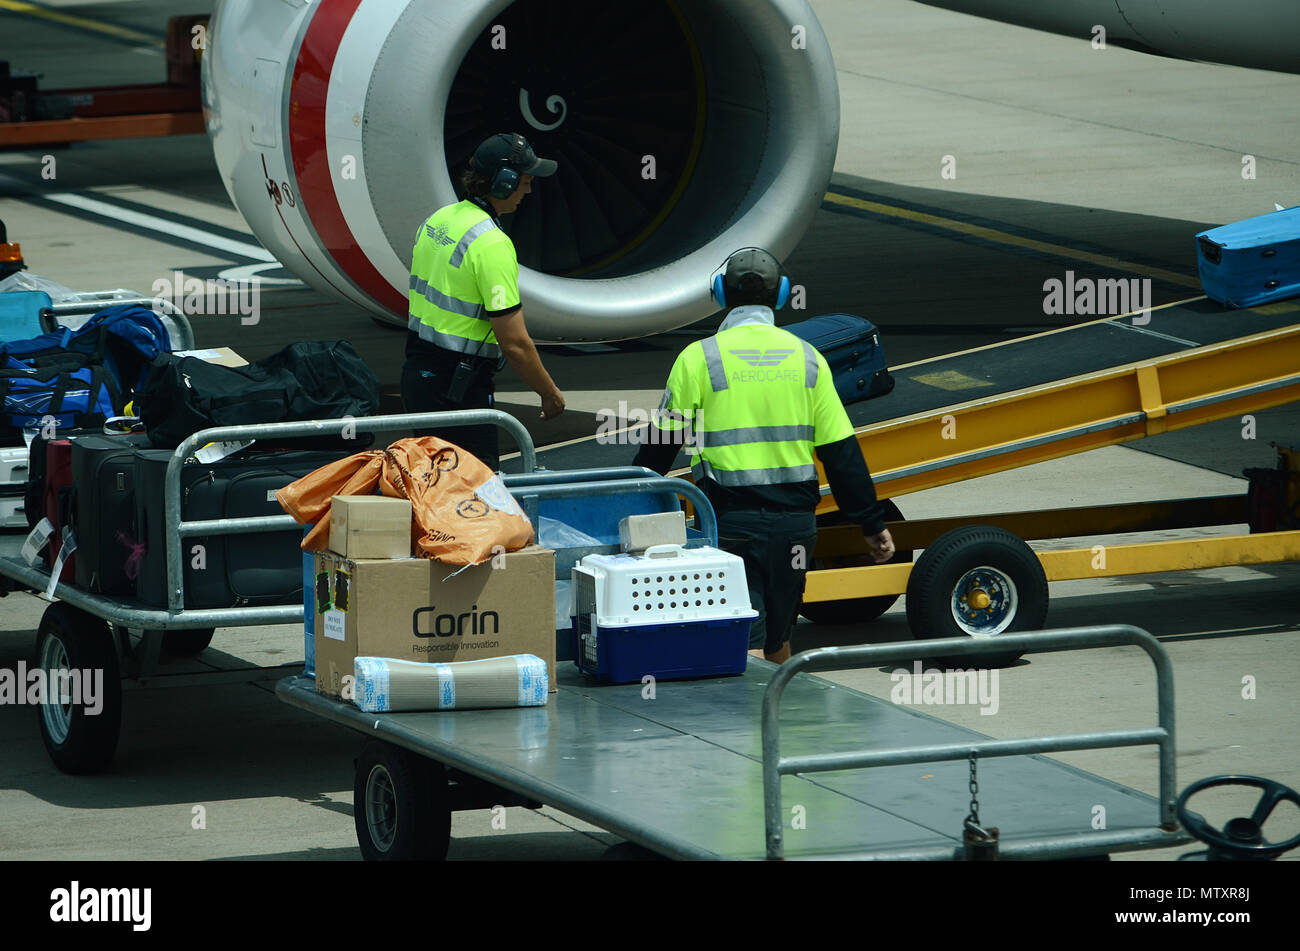 Luggage being loaded into passenger jet Stock Photo